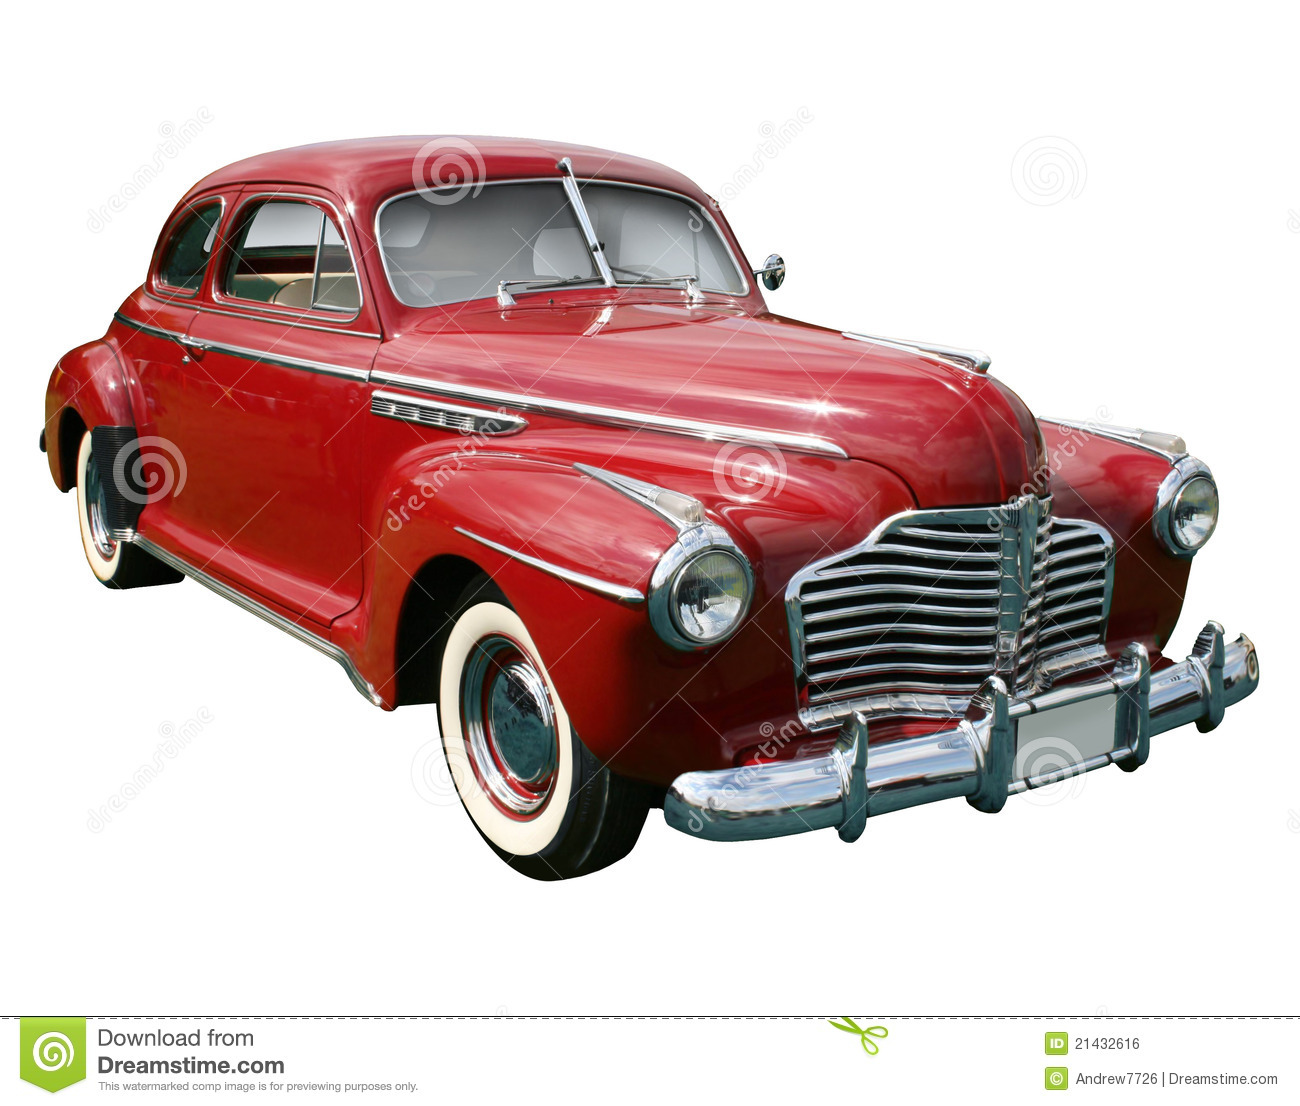 Classic American Red Car Royalty Free Stock Image   Image  21432616